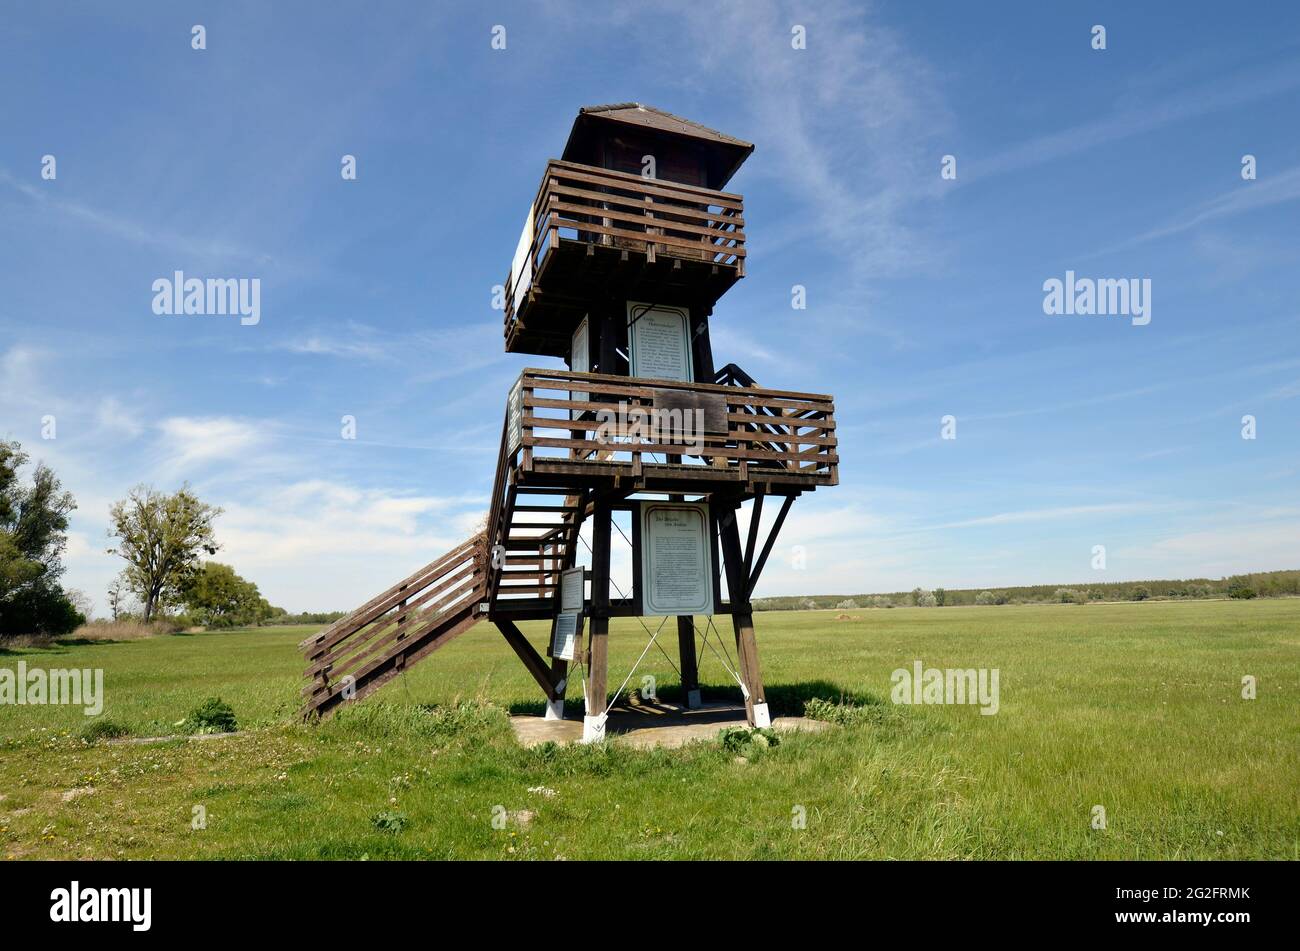 Andau, Austria - May 04, 2021: Lookout tower at the border crossing point named - Iron Curtain - along the Austro-Hungarian border in Burgenland where Stock Photo